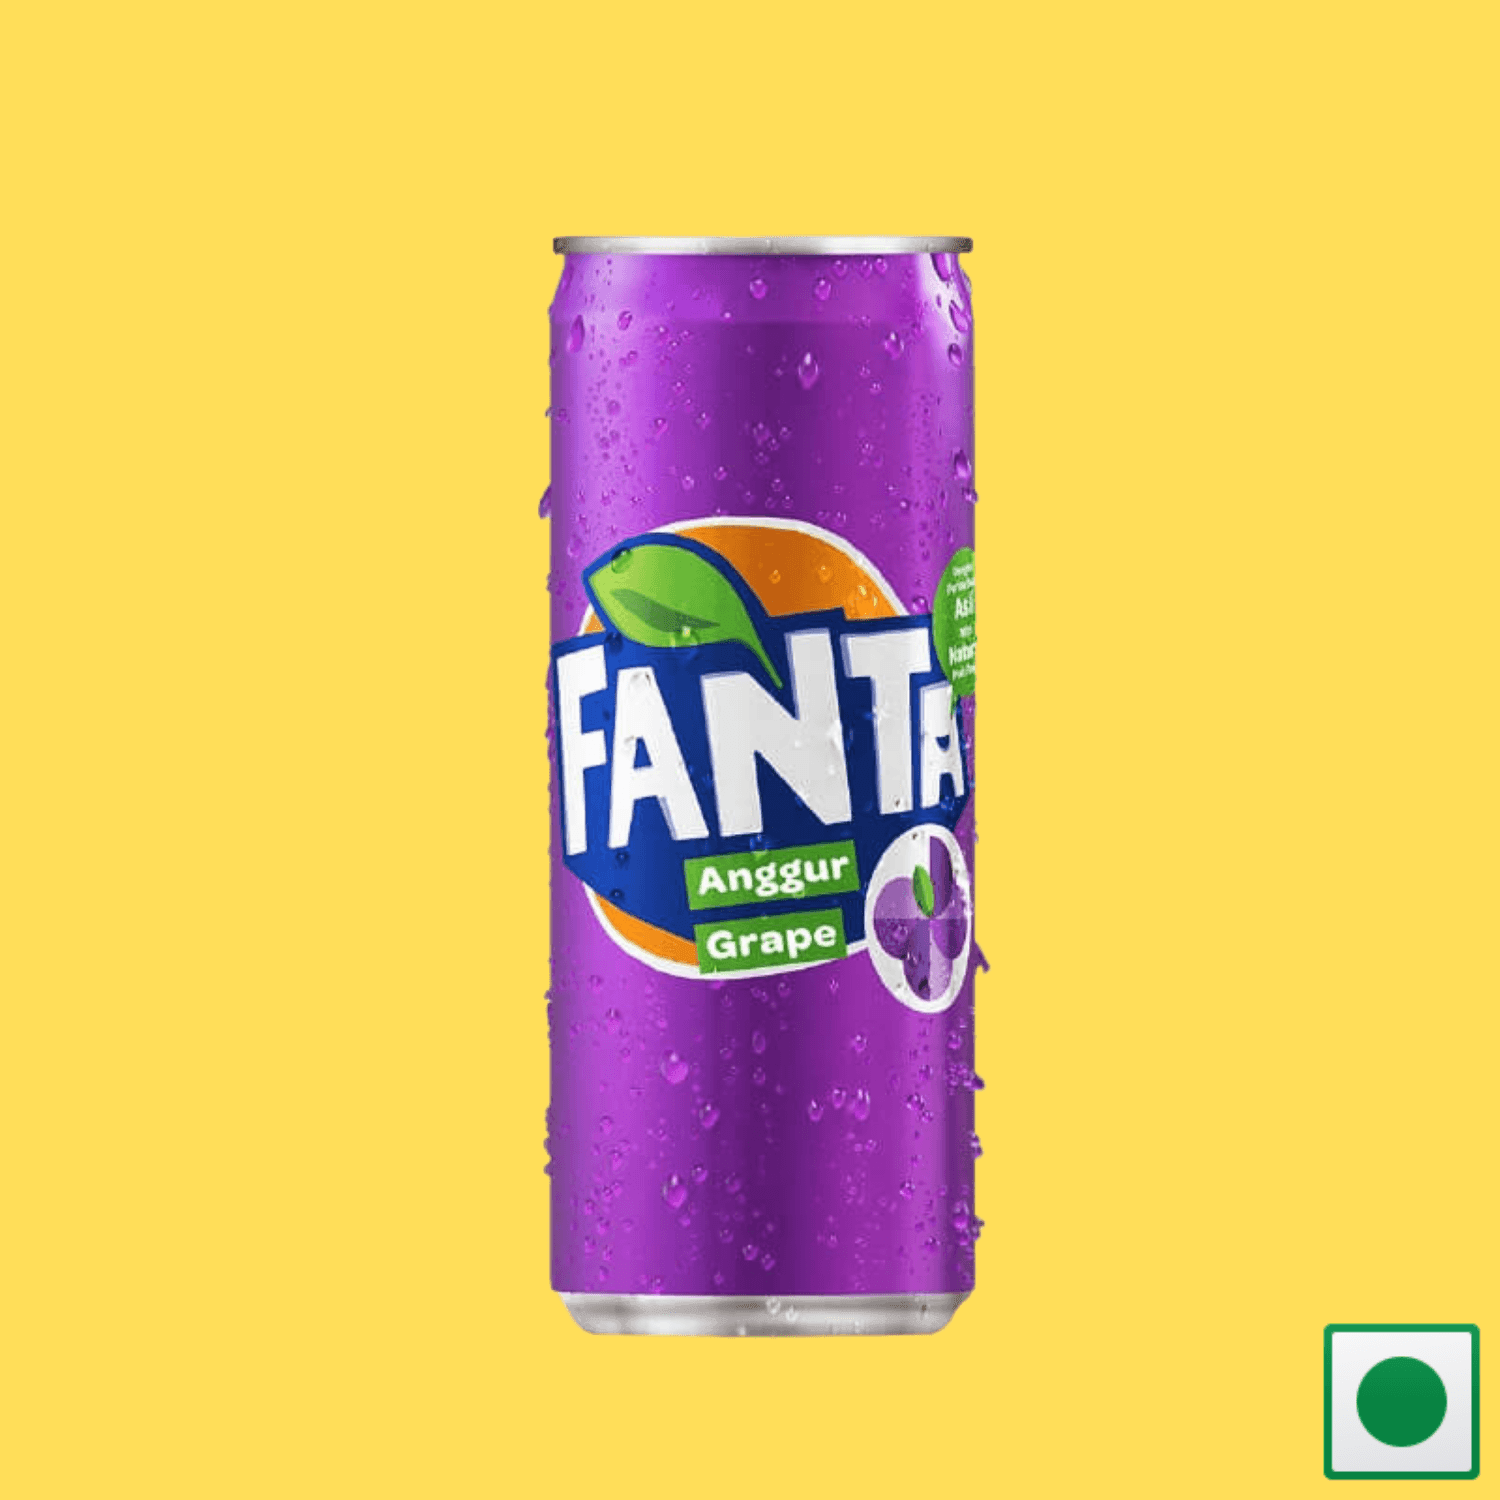 Fanta Grape Flavoured Drink, 320ml + Fanta Laici Lychee Drink imported  330ml (Combo Pack)